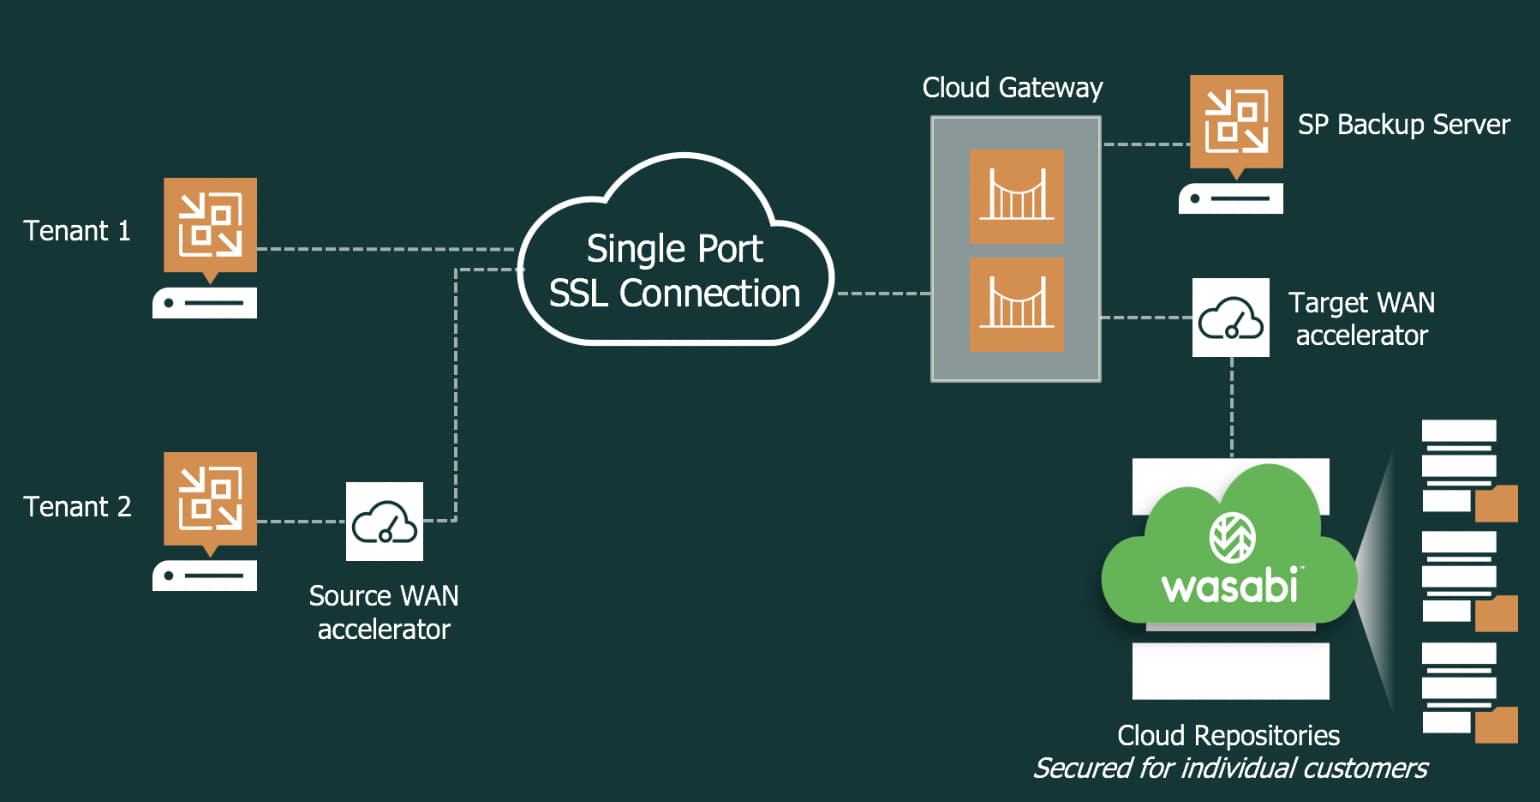 Enhance Your Data Security with Veeam Cloud Backup Solutions